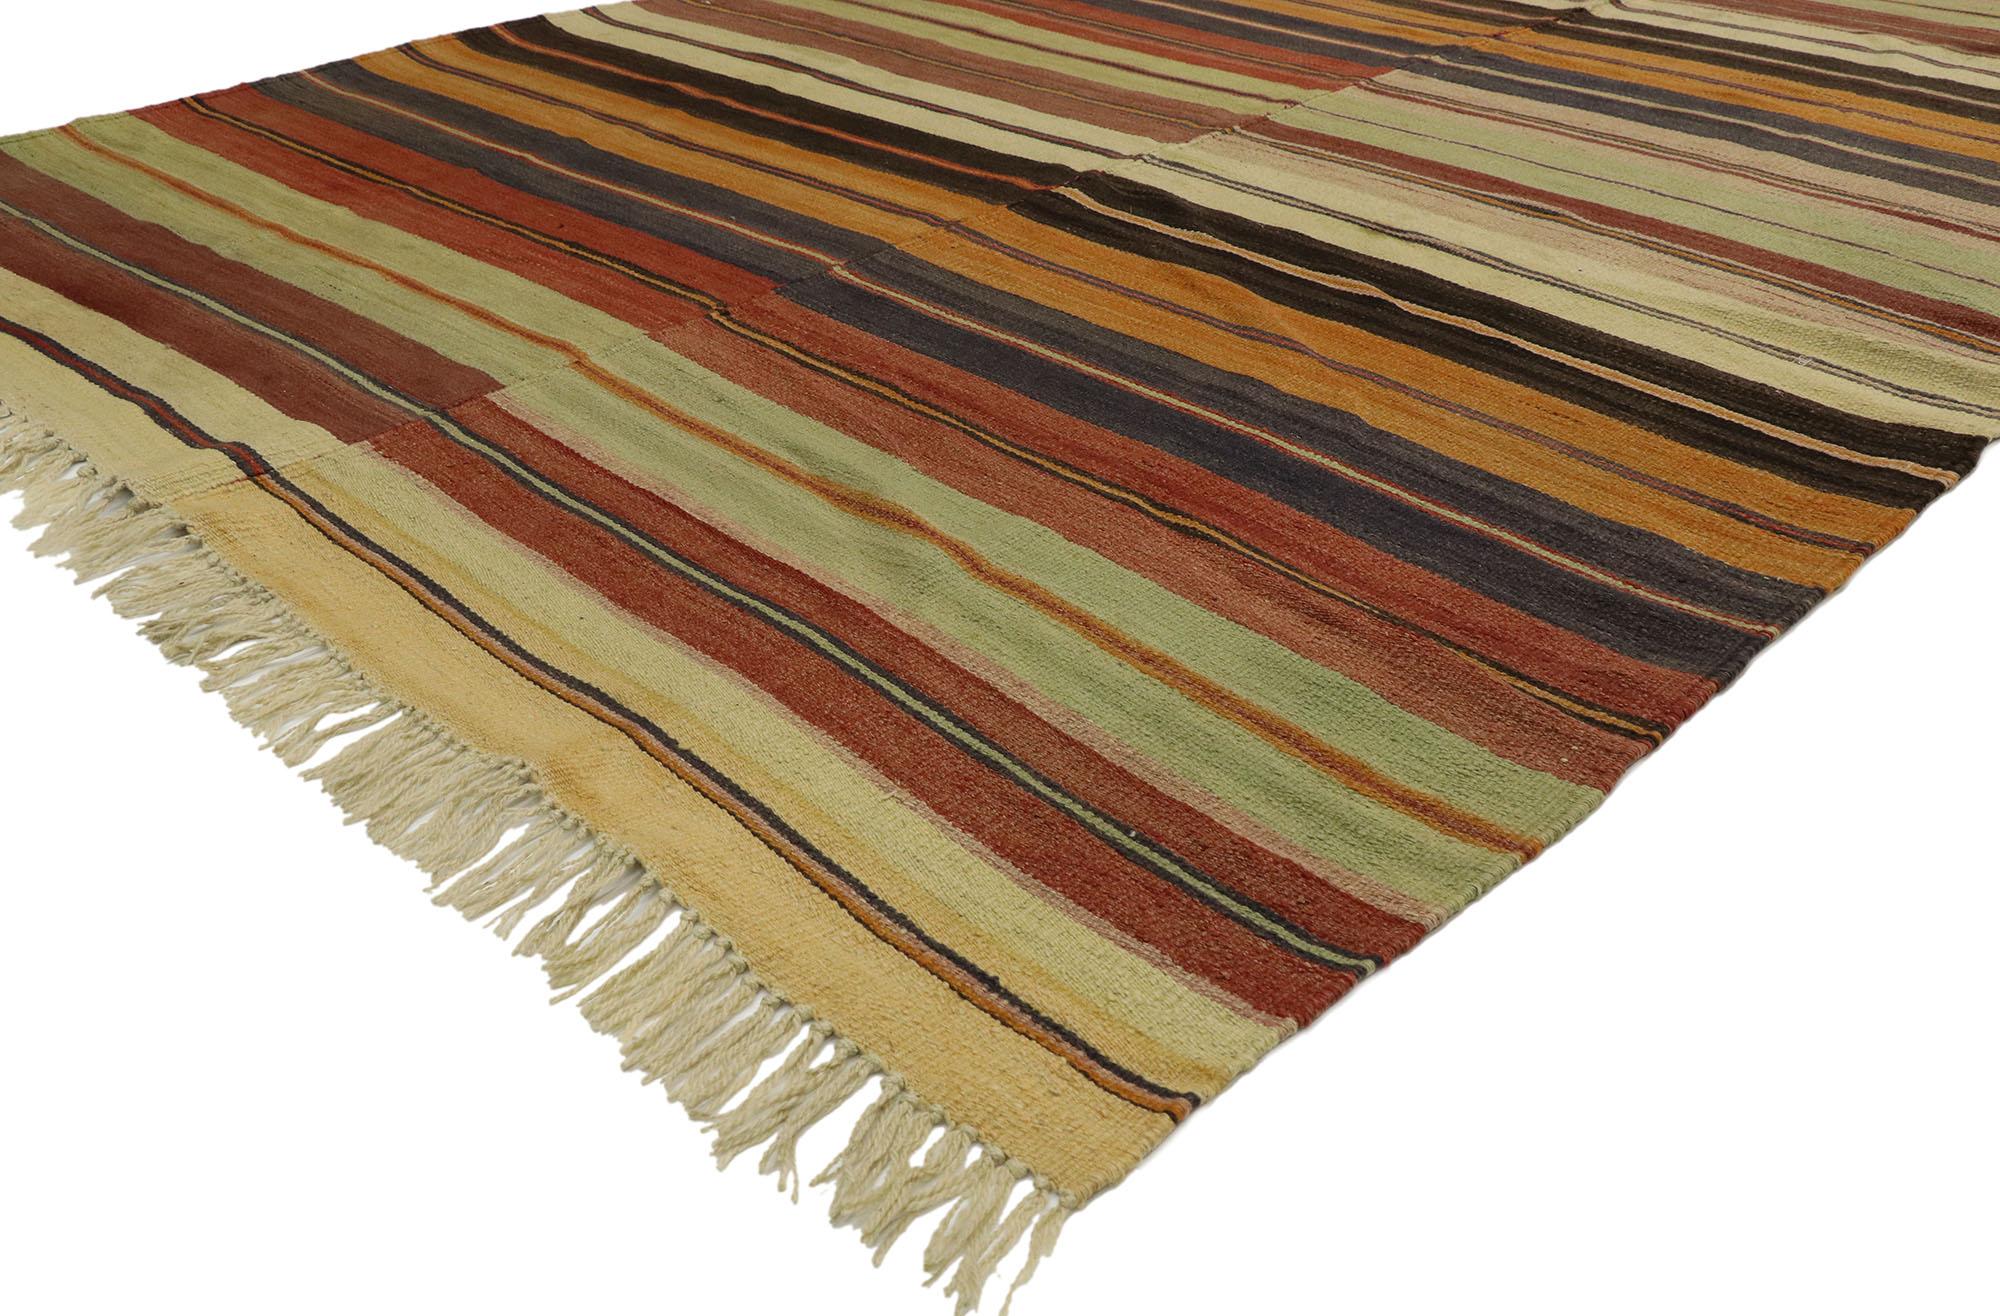 53130, distressed vintage Turkish Striped Kilim rug with Modern Rustic Cabin style. With its warm hues and rugged beauty, this handwoven wool striped Kilim rug manages to meld contemporary, modern, and Traditional Design elements. The flat-weave